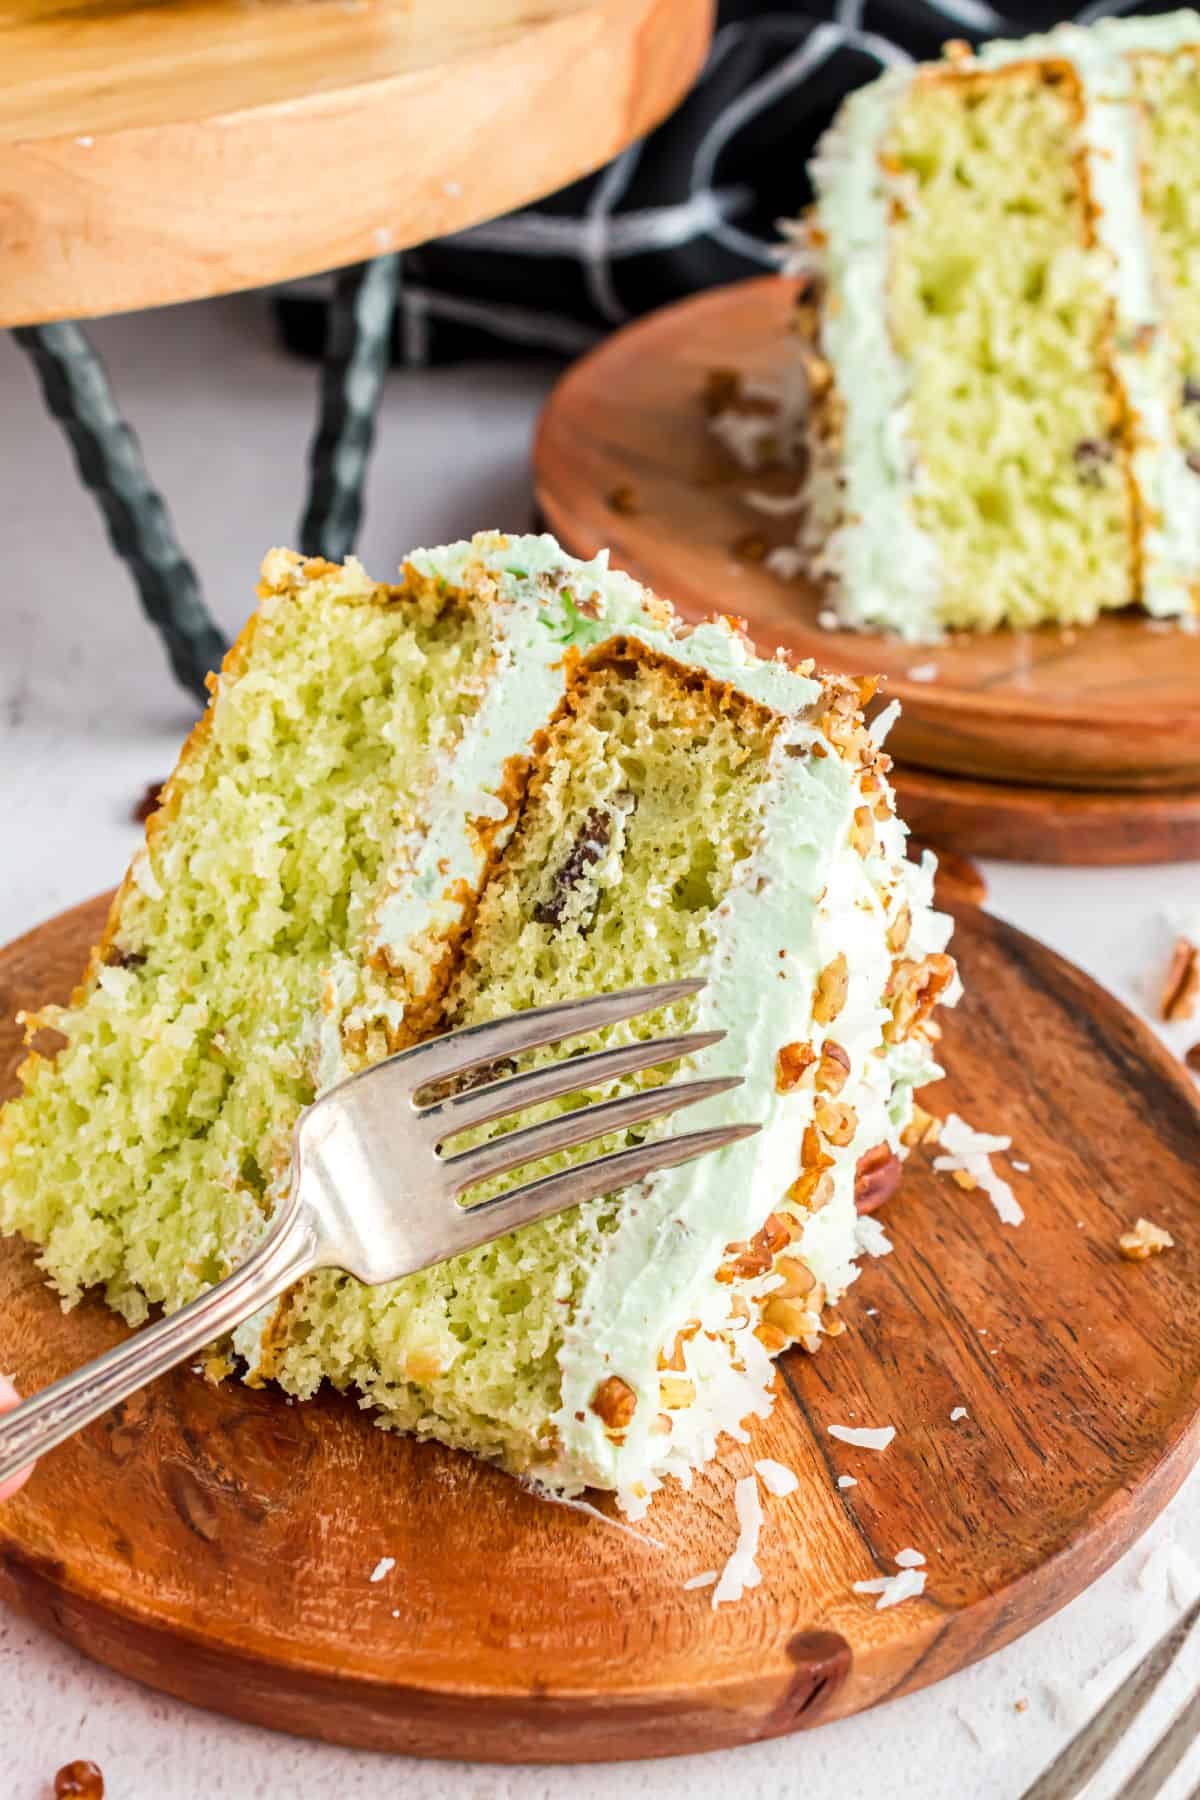 Slice of watergate cake with a fork taking a bite.